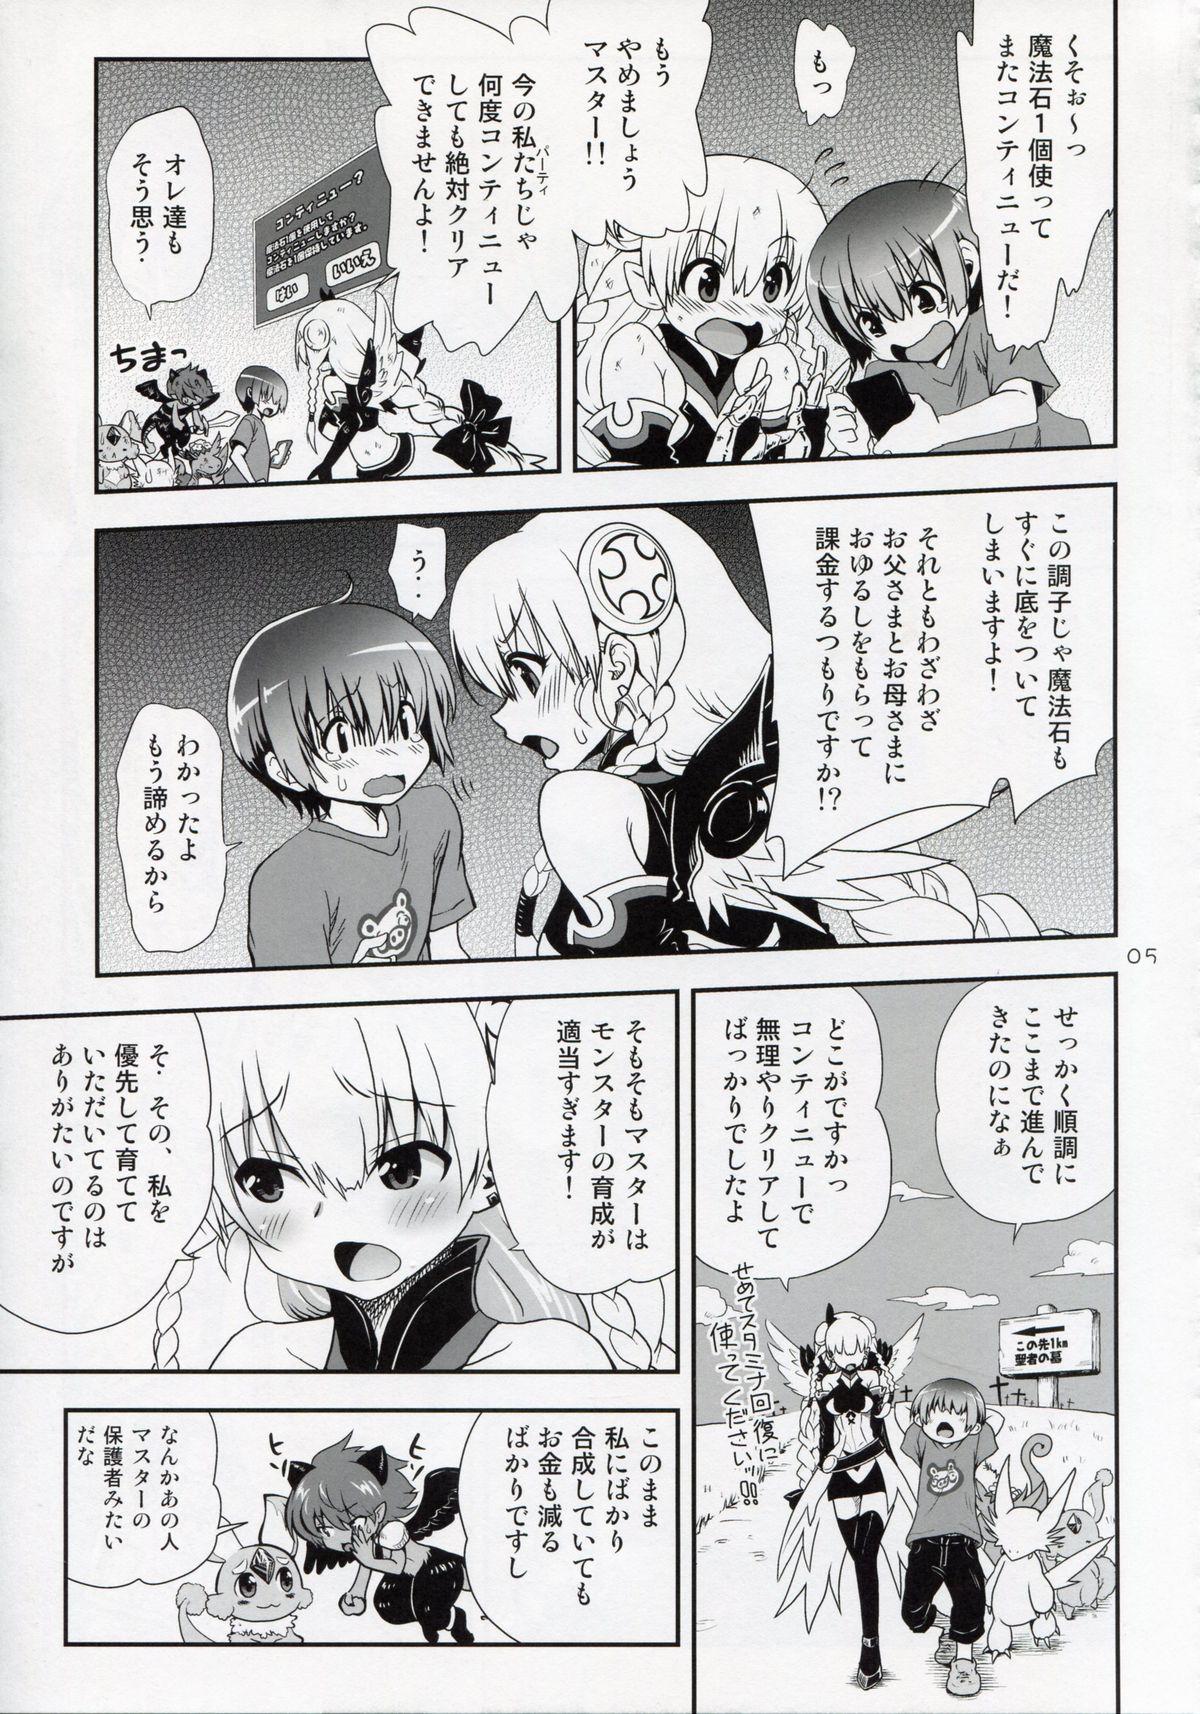 Rubdown Oyurushi Master - Puzzle and dragons Blackdick - Page 5